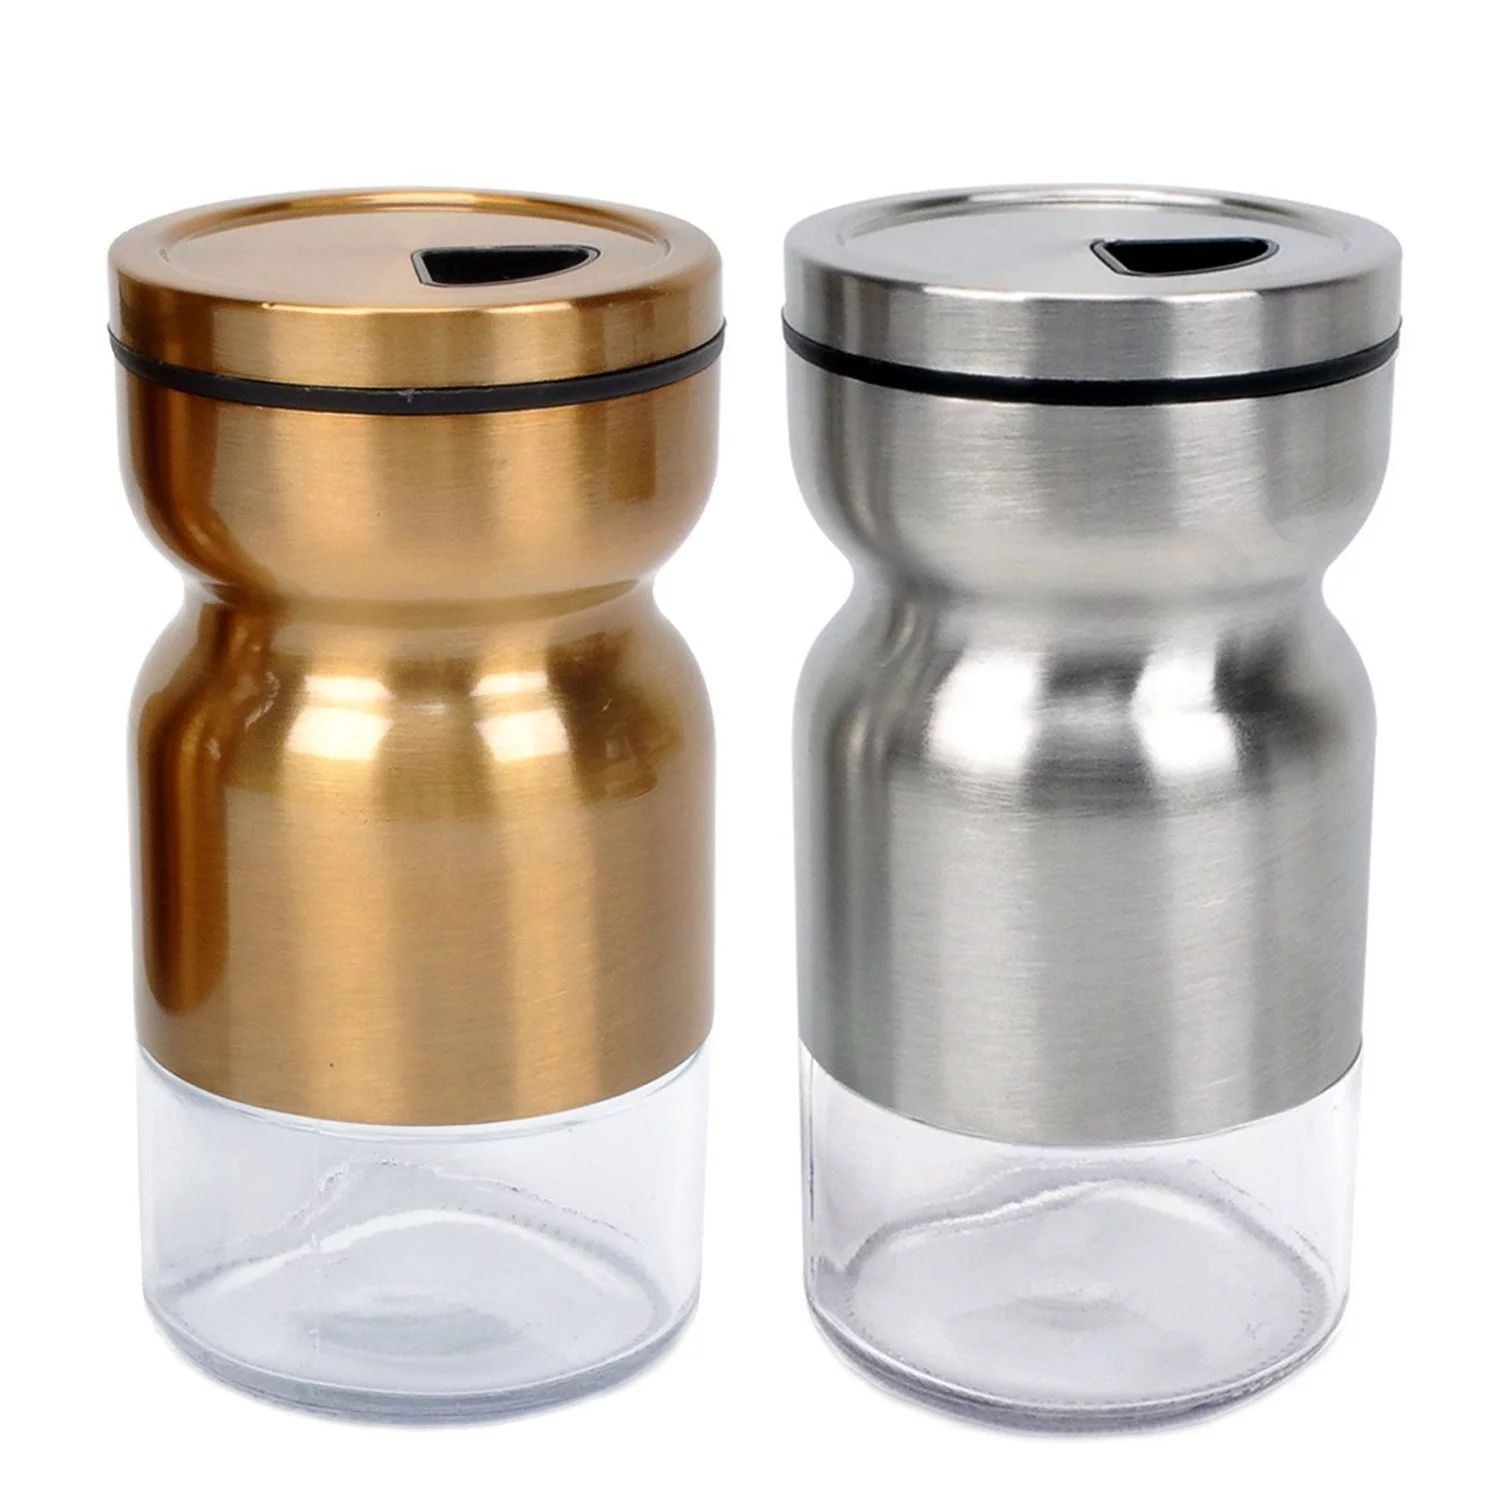 Salt & Pepper Shakers Stainless Steel Cover Glass Bottom With Rotating Cover - Spice Sugar Shaker... | Walmart (US)